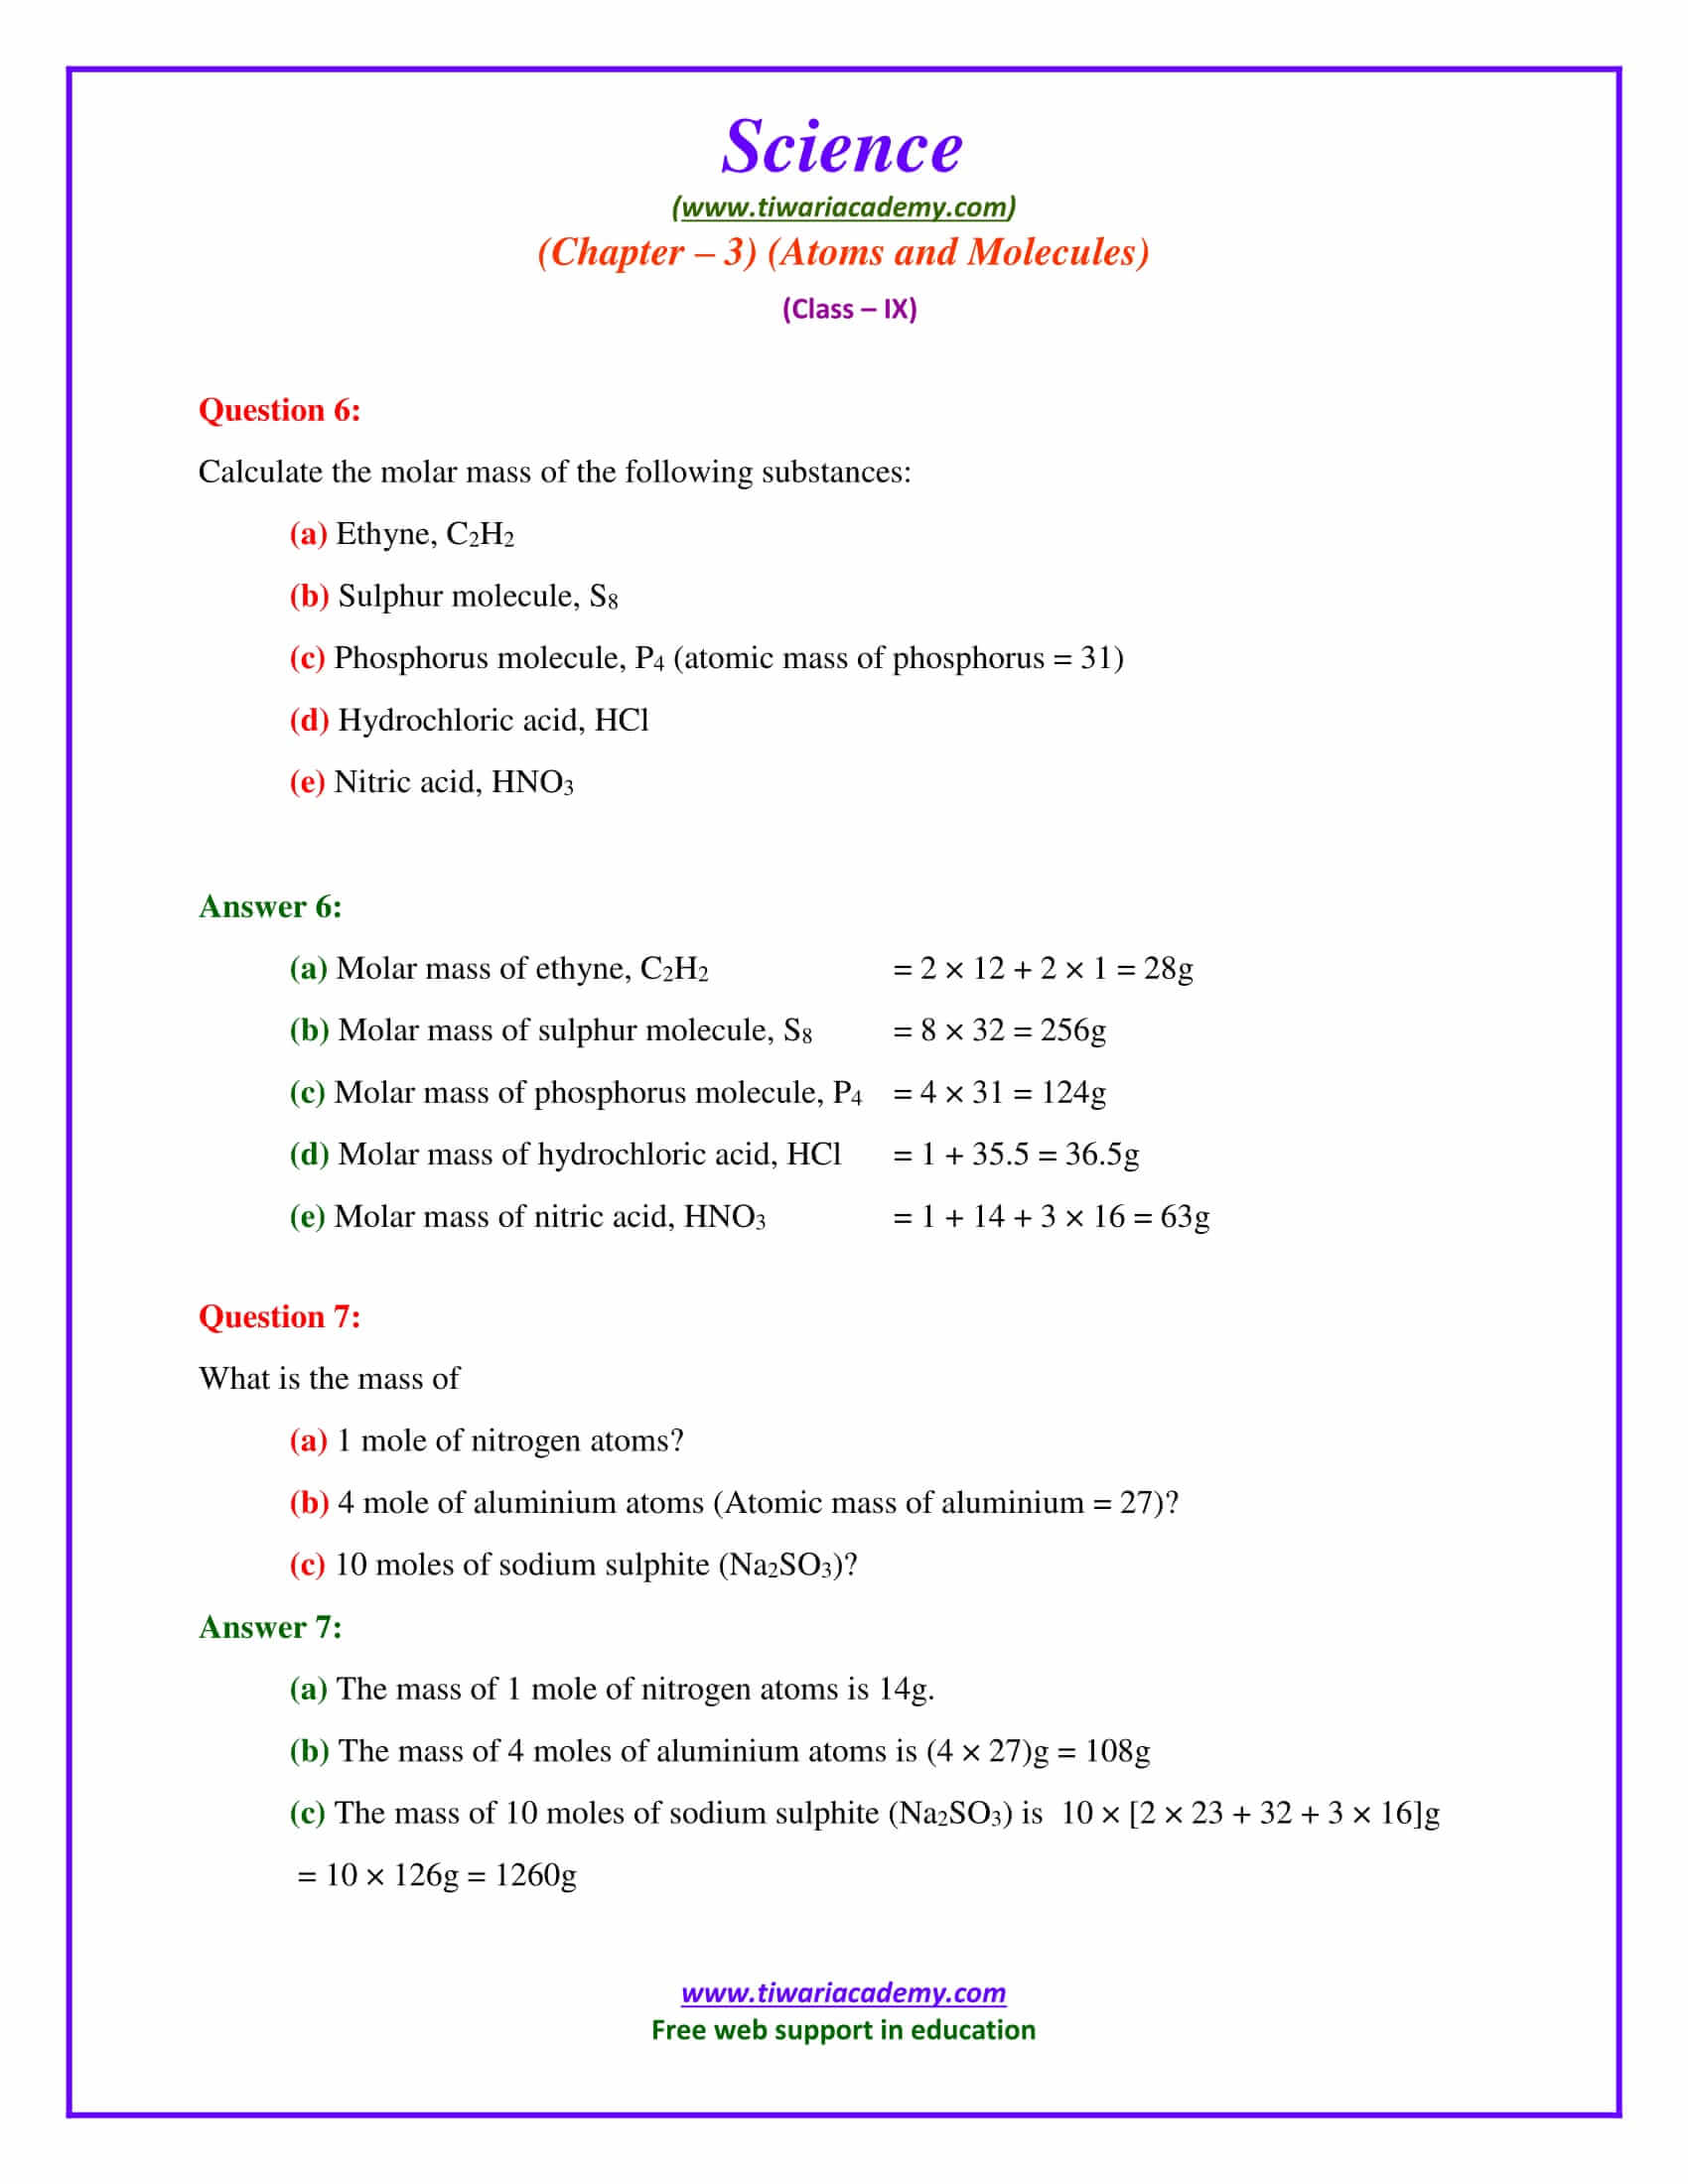 NCERT Solutions for Class 9 Science Chapter 3 Atoms and Molecules Exercises Question answers free download